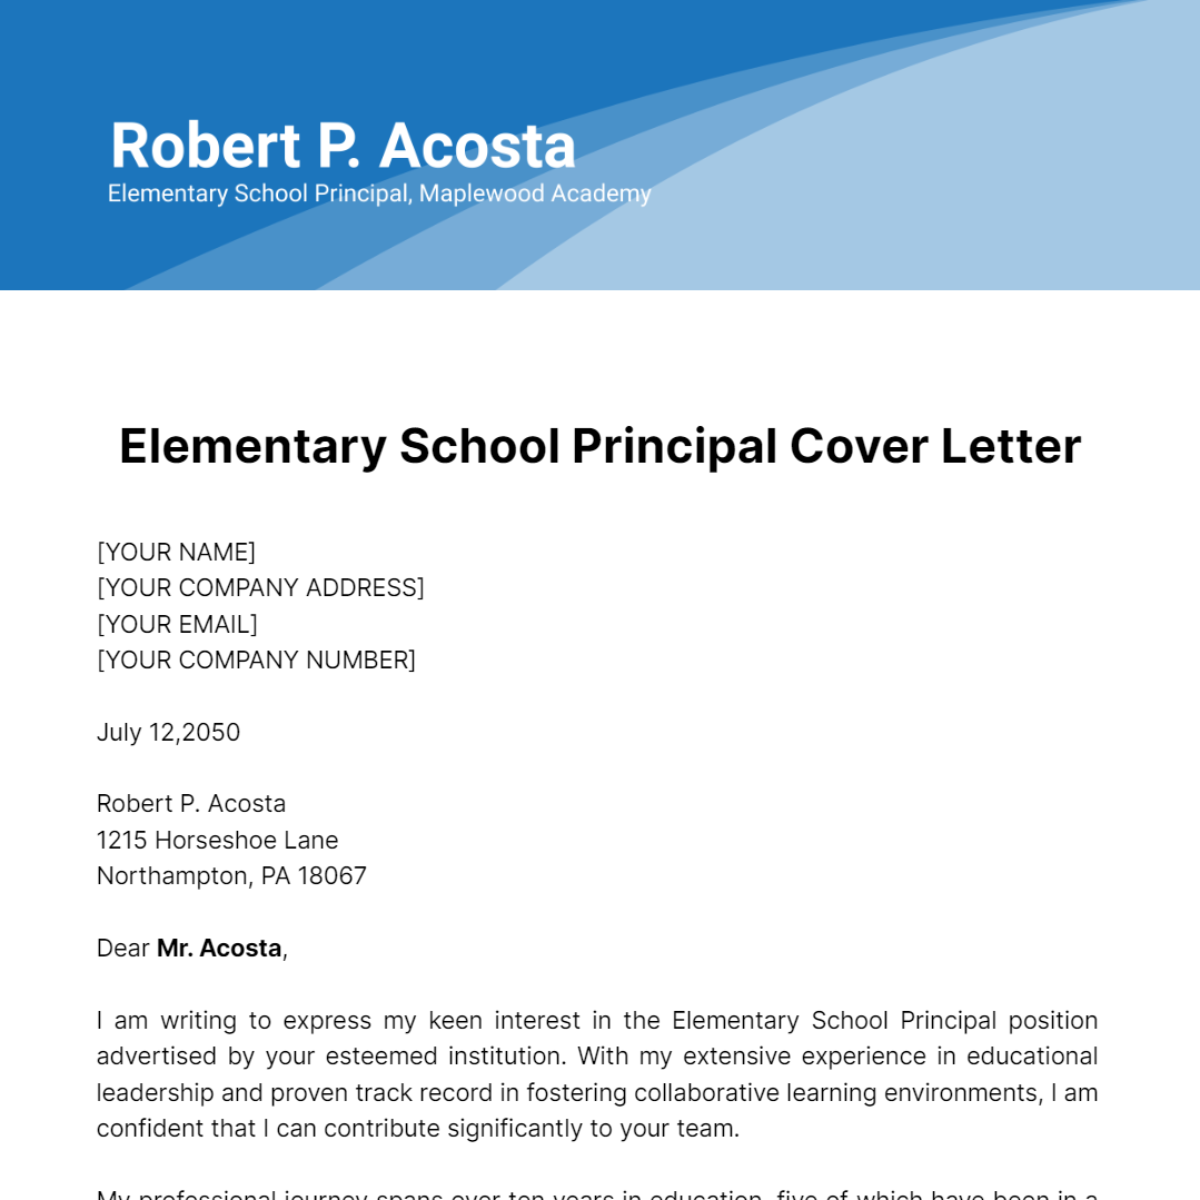 Elementary School Principal Cover Letter Template